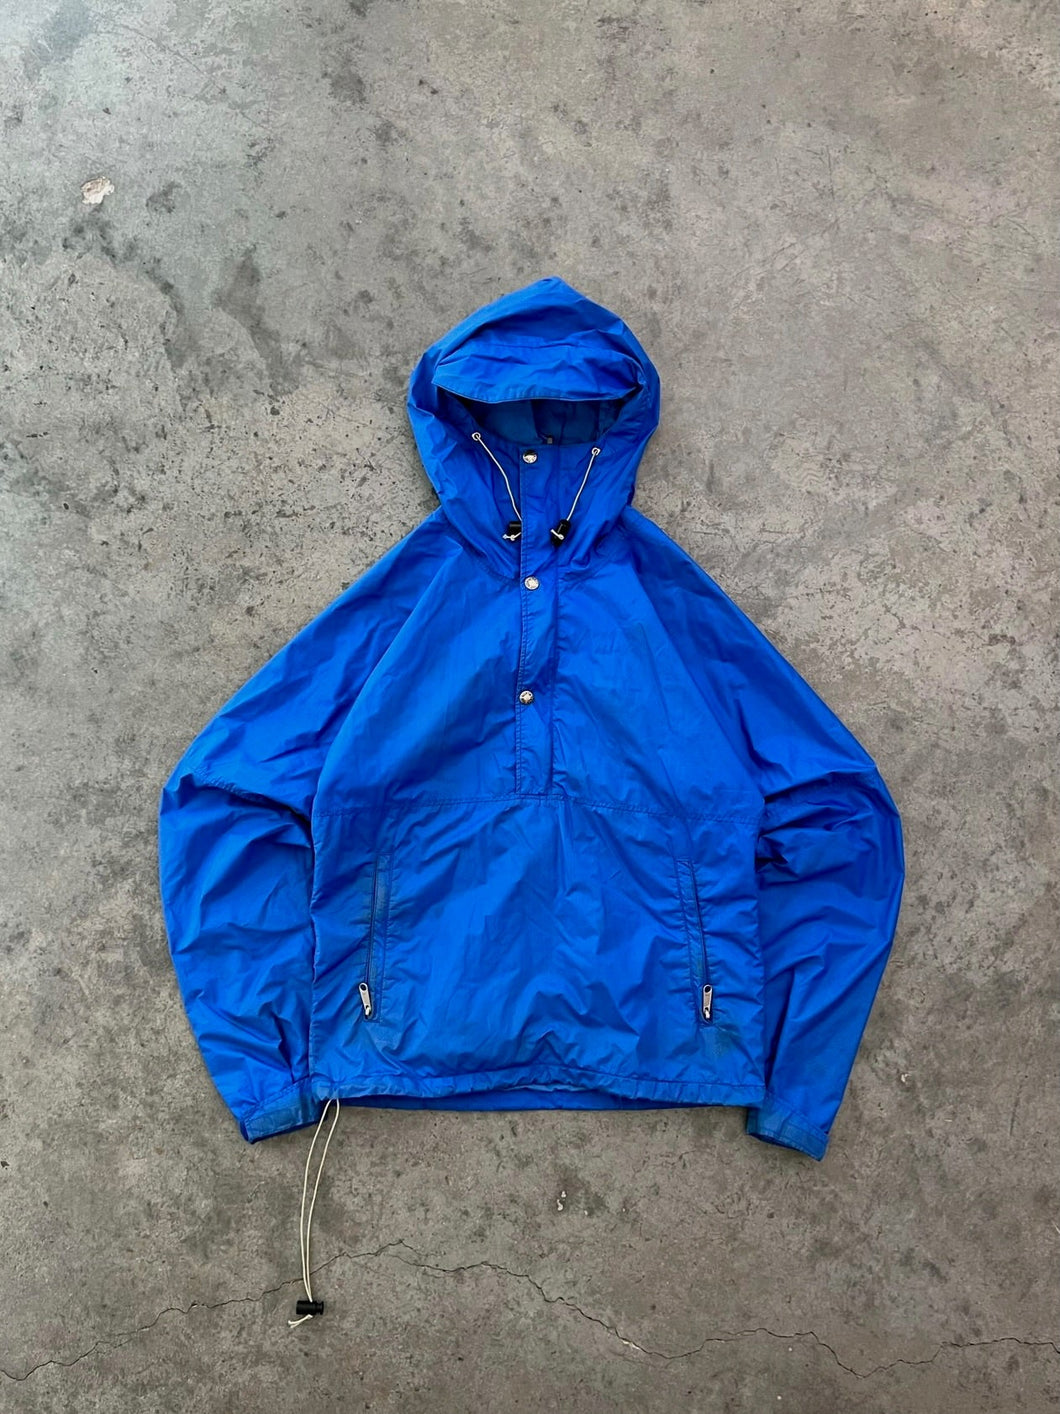 ROYAL BLUE THE NORTH FACE ANORAK GORE-TEX JACKET - 1980S